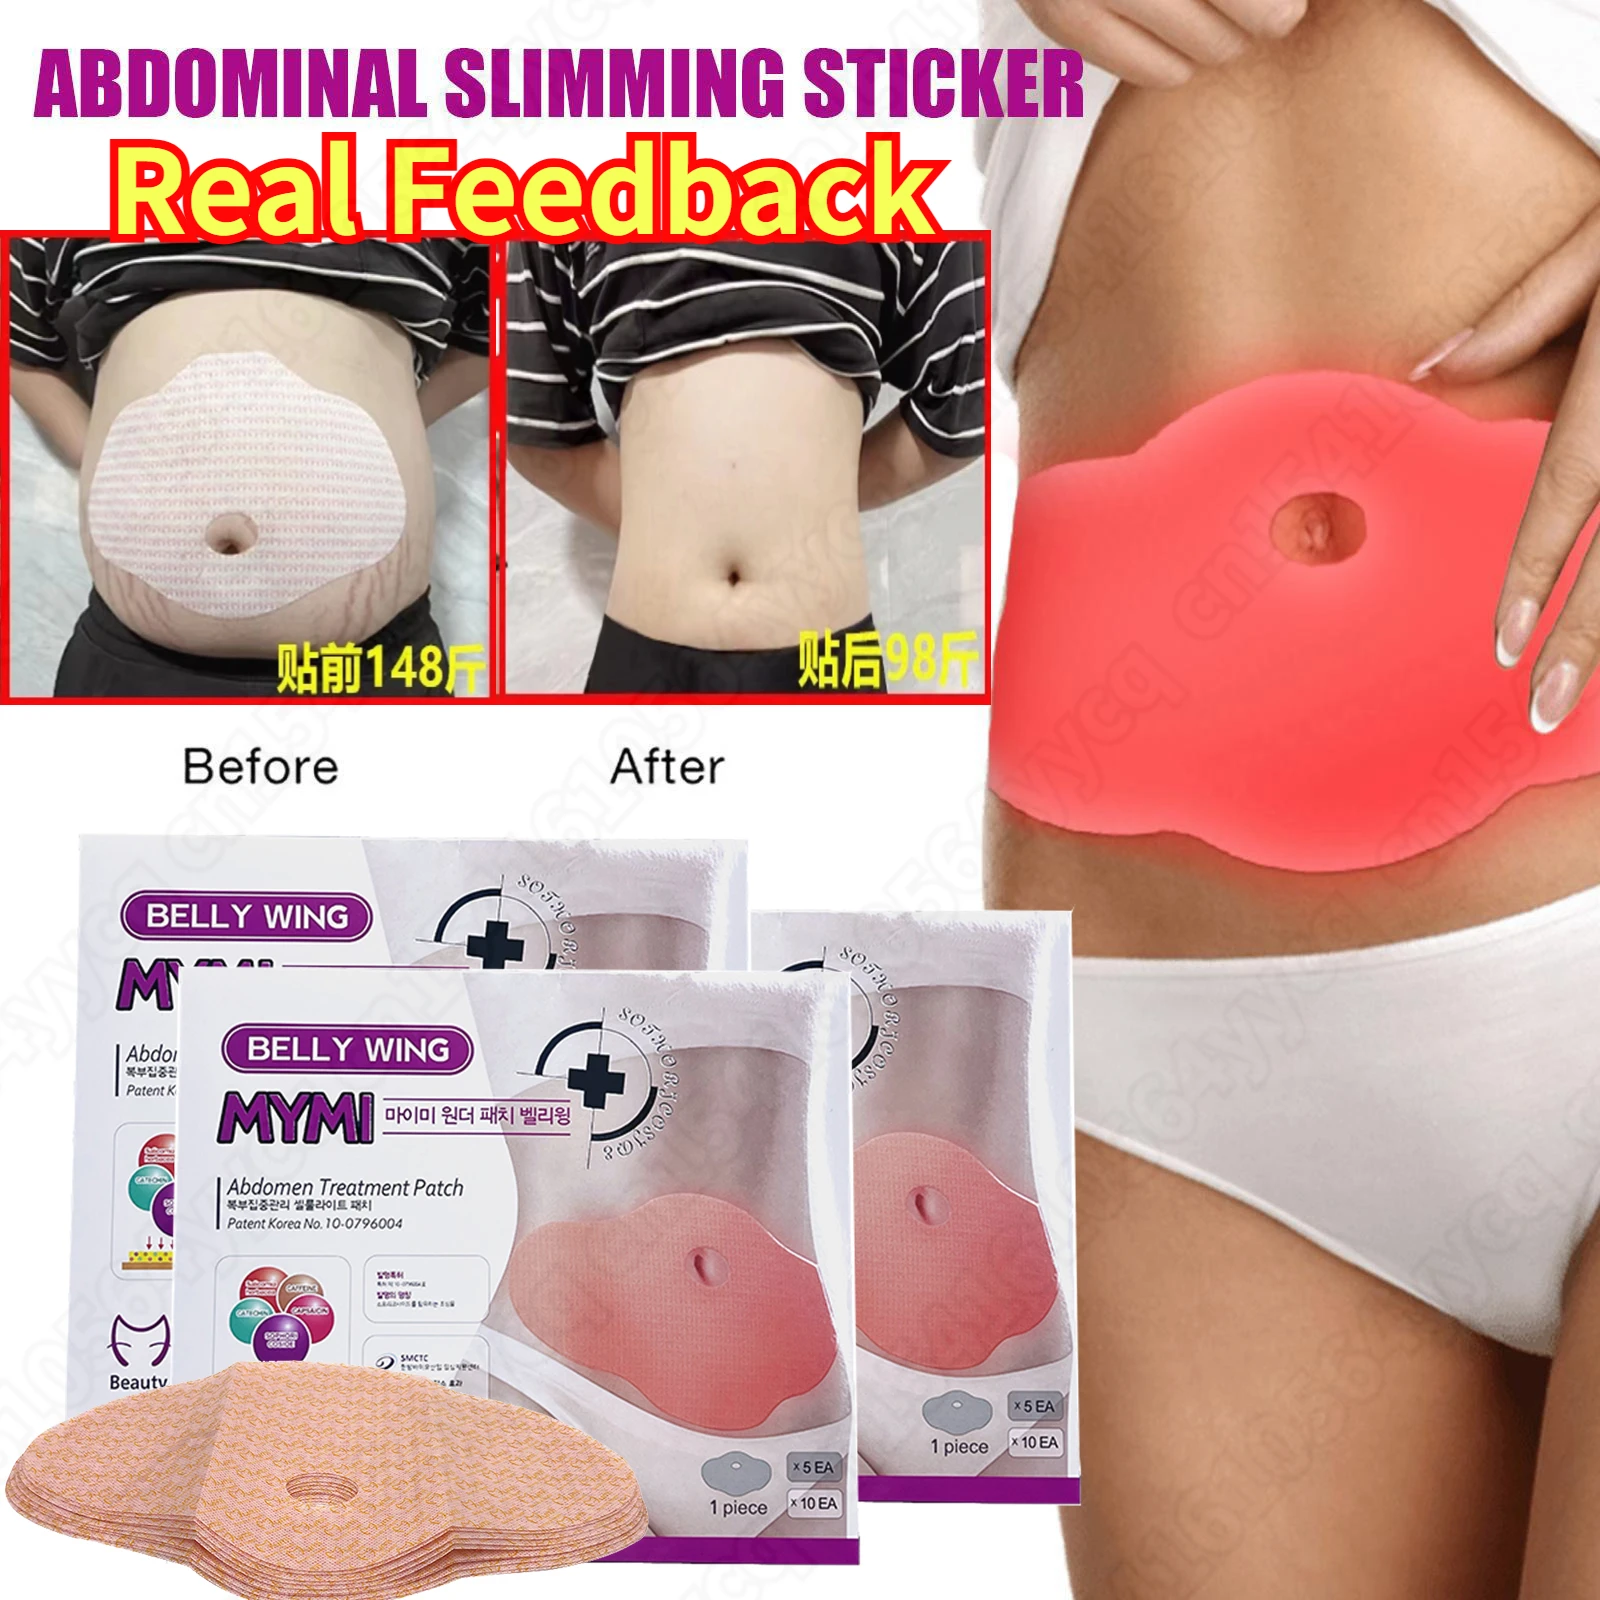 

30/60pcs Belly Slim Patch Abdomen Slimming Fat Burning Navel Stick Weight Loss Slimer Tool Wonder Hot Quick Slimming Patch